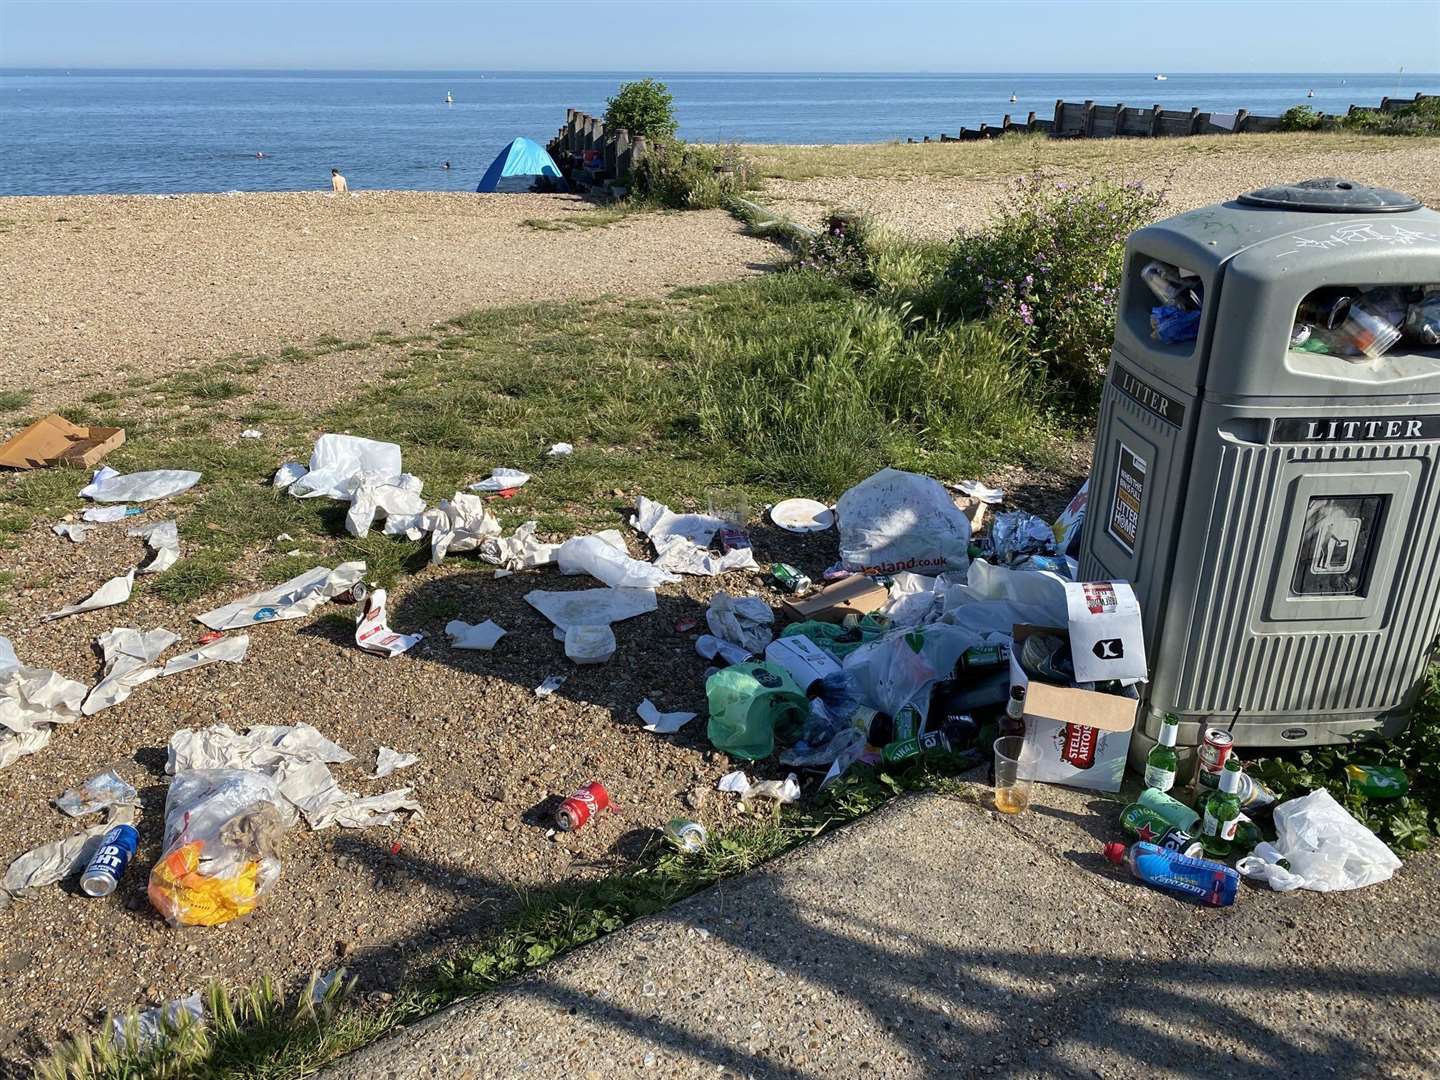 Two years ago council bosses faced filthy scenes like this - but now they say beaches are the cleanest in years. Picture: Twitter / @candy43759291